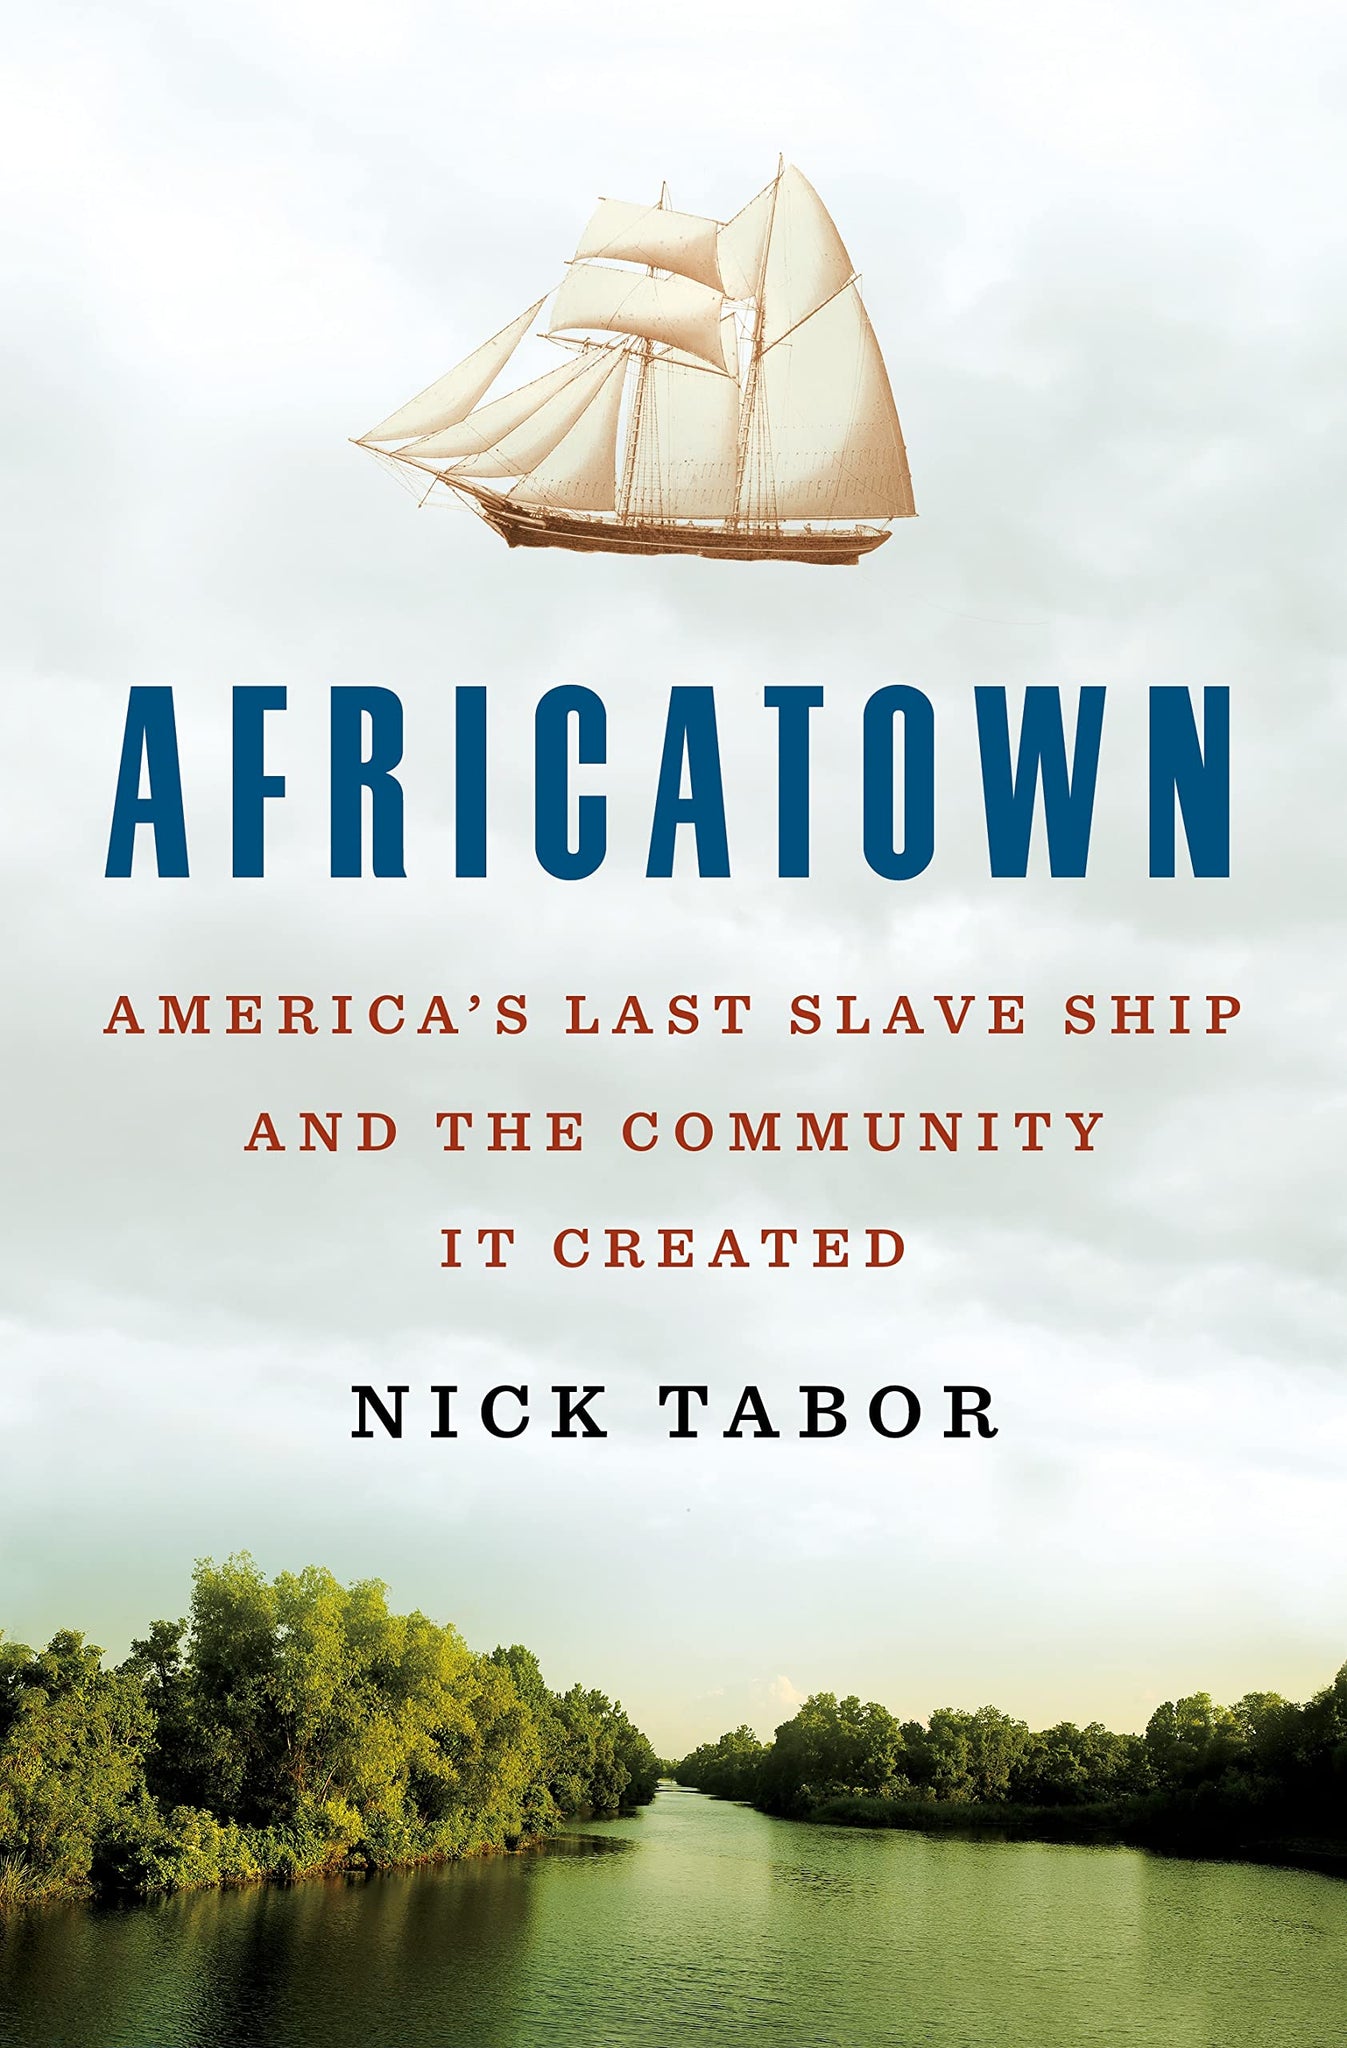 Africatown: America's Last Slave Ship and the Community It Created (Hardcover)